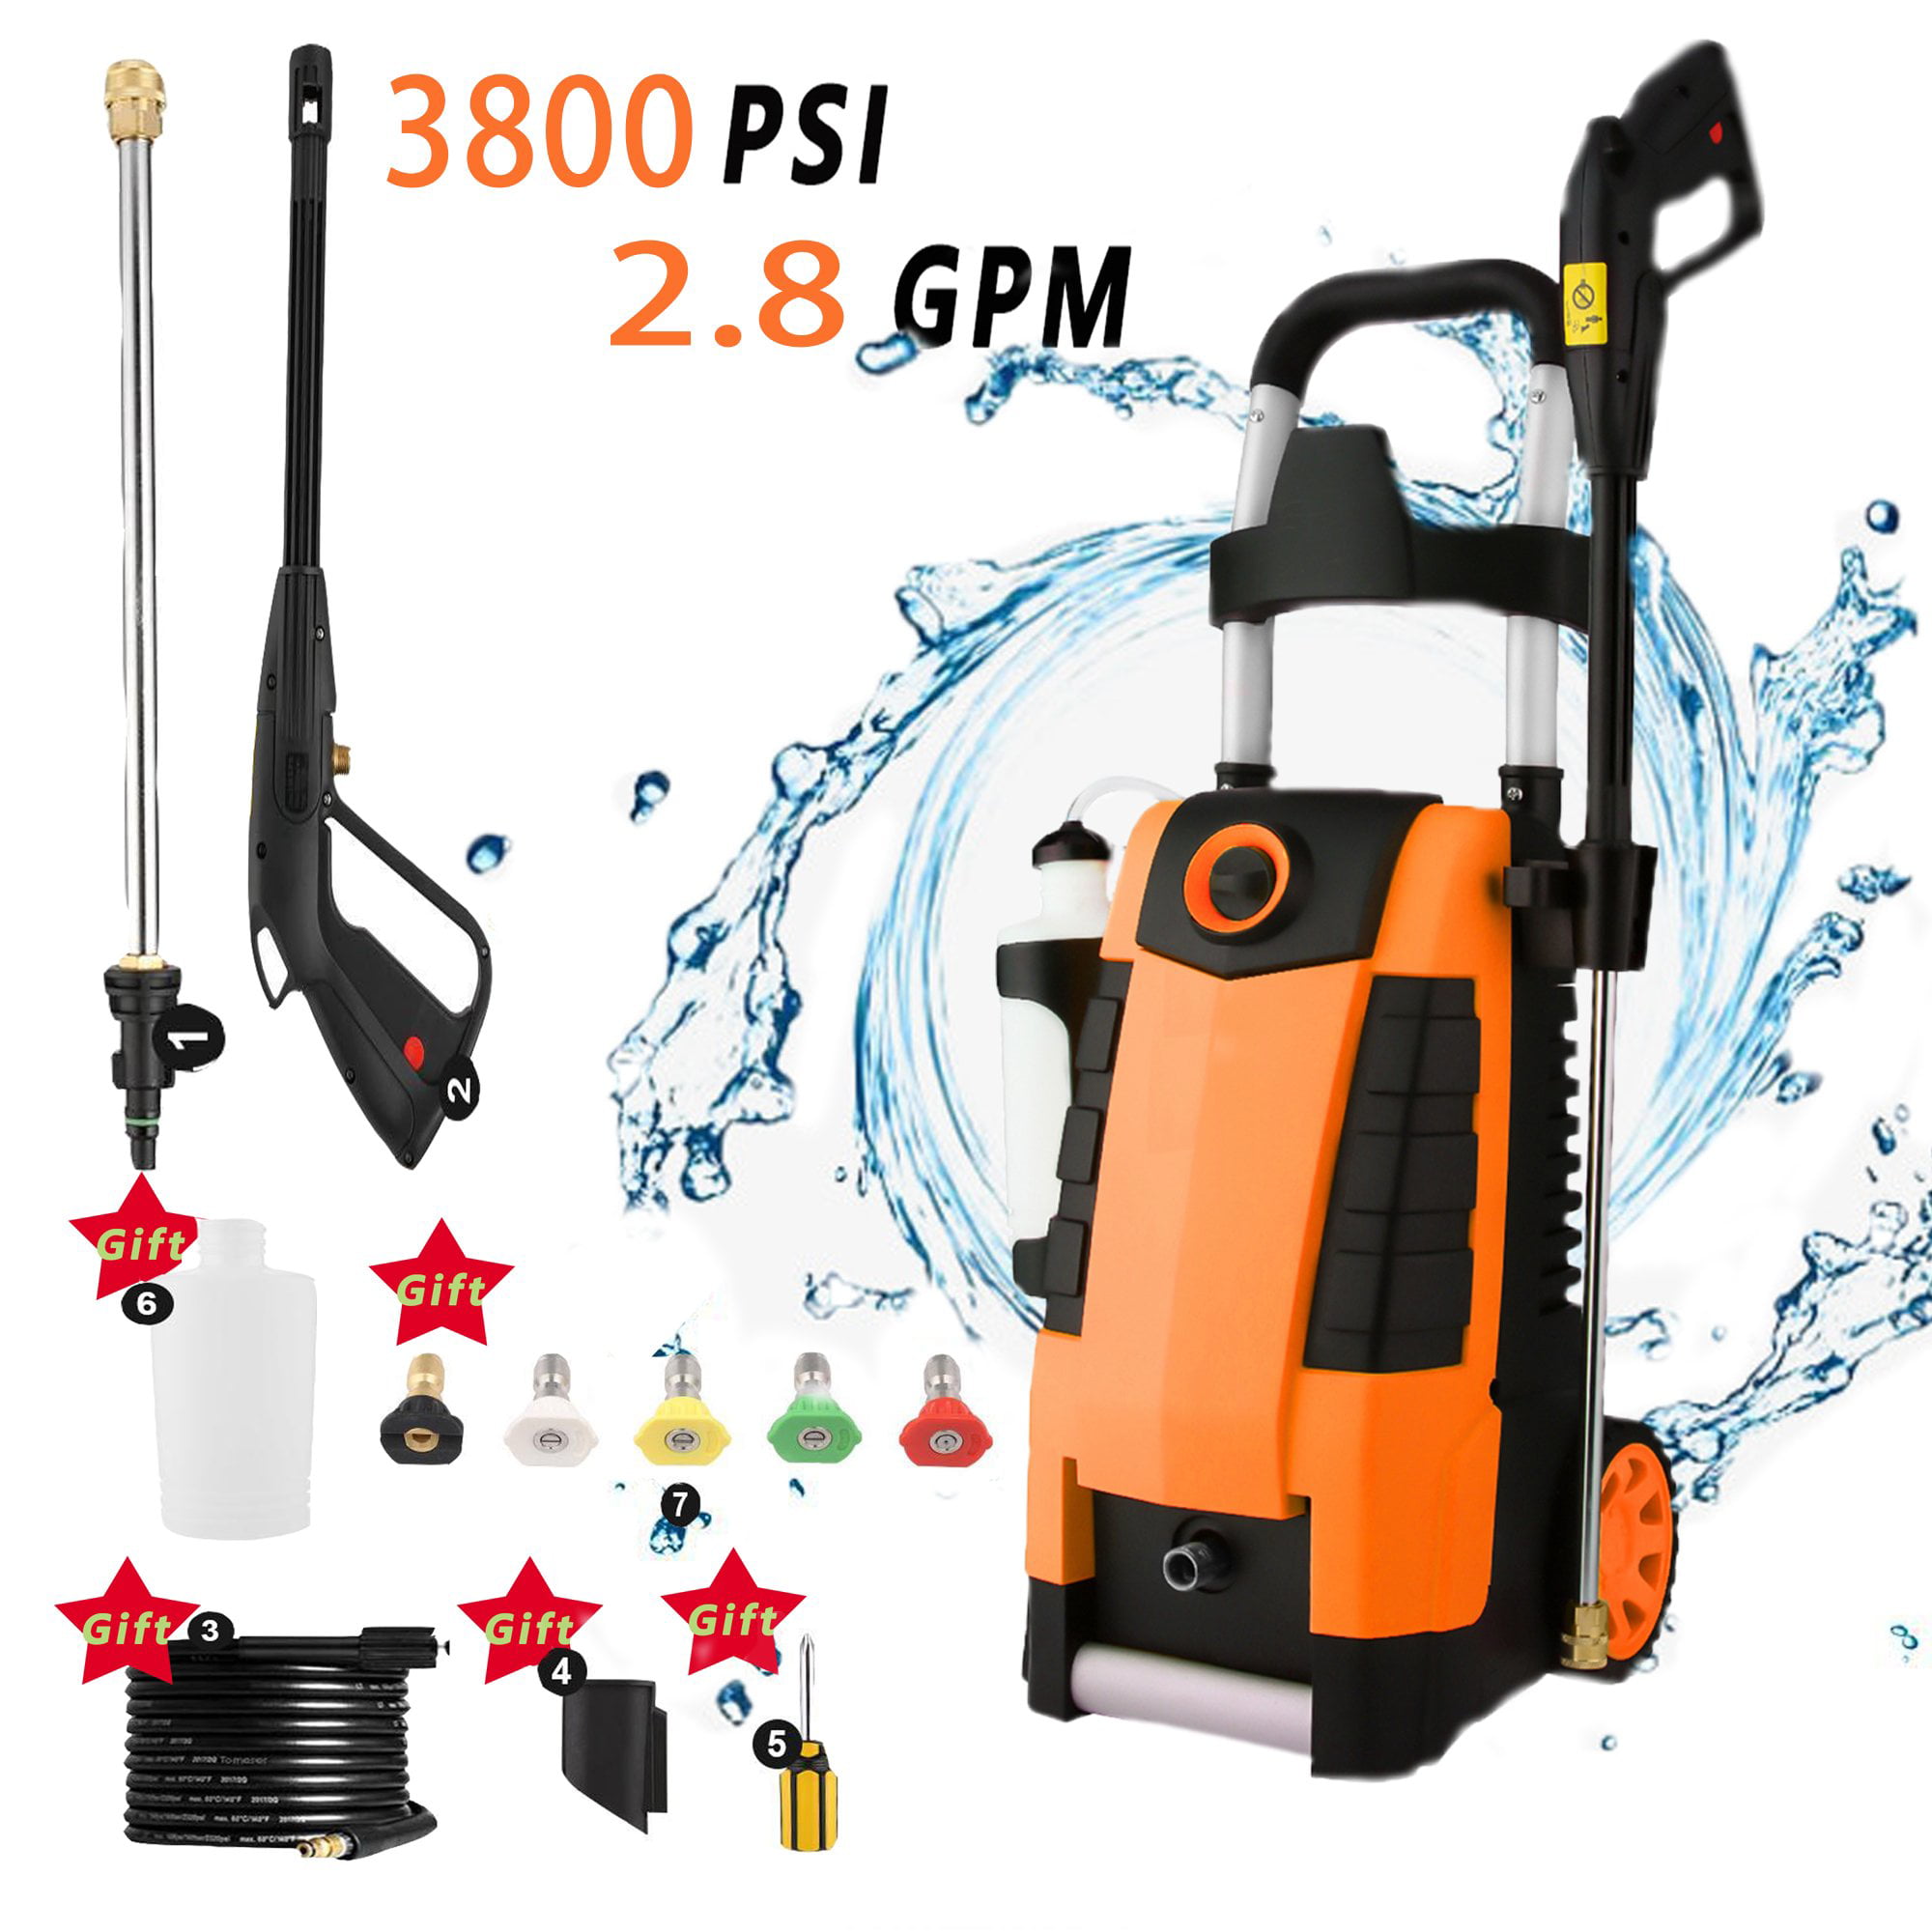 High Pressure Cleaner Machine 2.8GPM High Pressure Power Washer Machine 2000W with Hose Reel+4 Interchangeable Nozzles Red mrliance Pressure Washer 3800PSI 